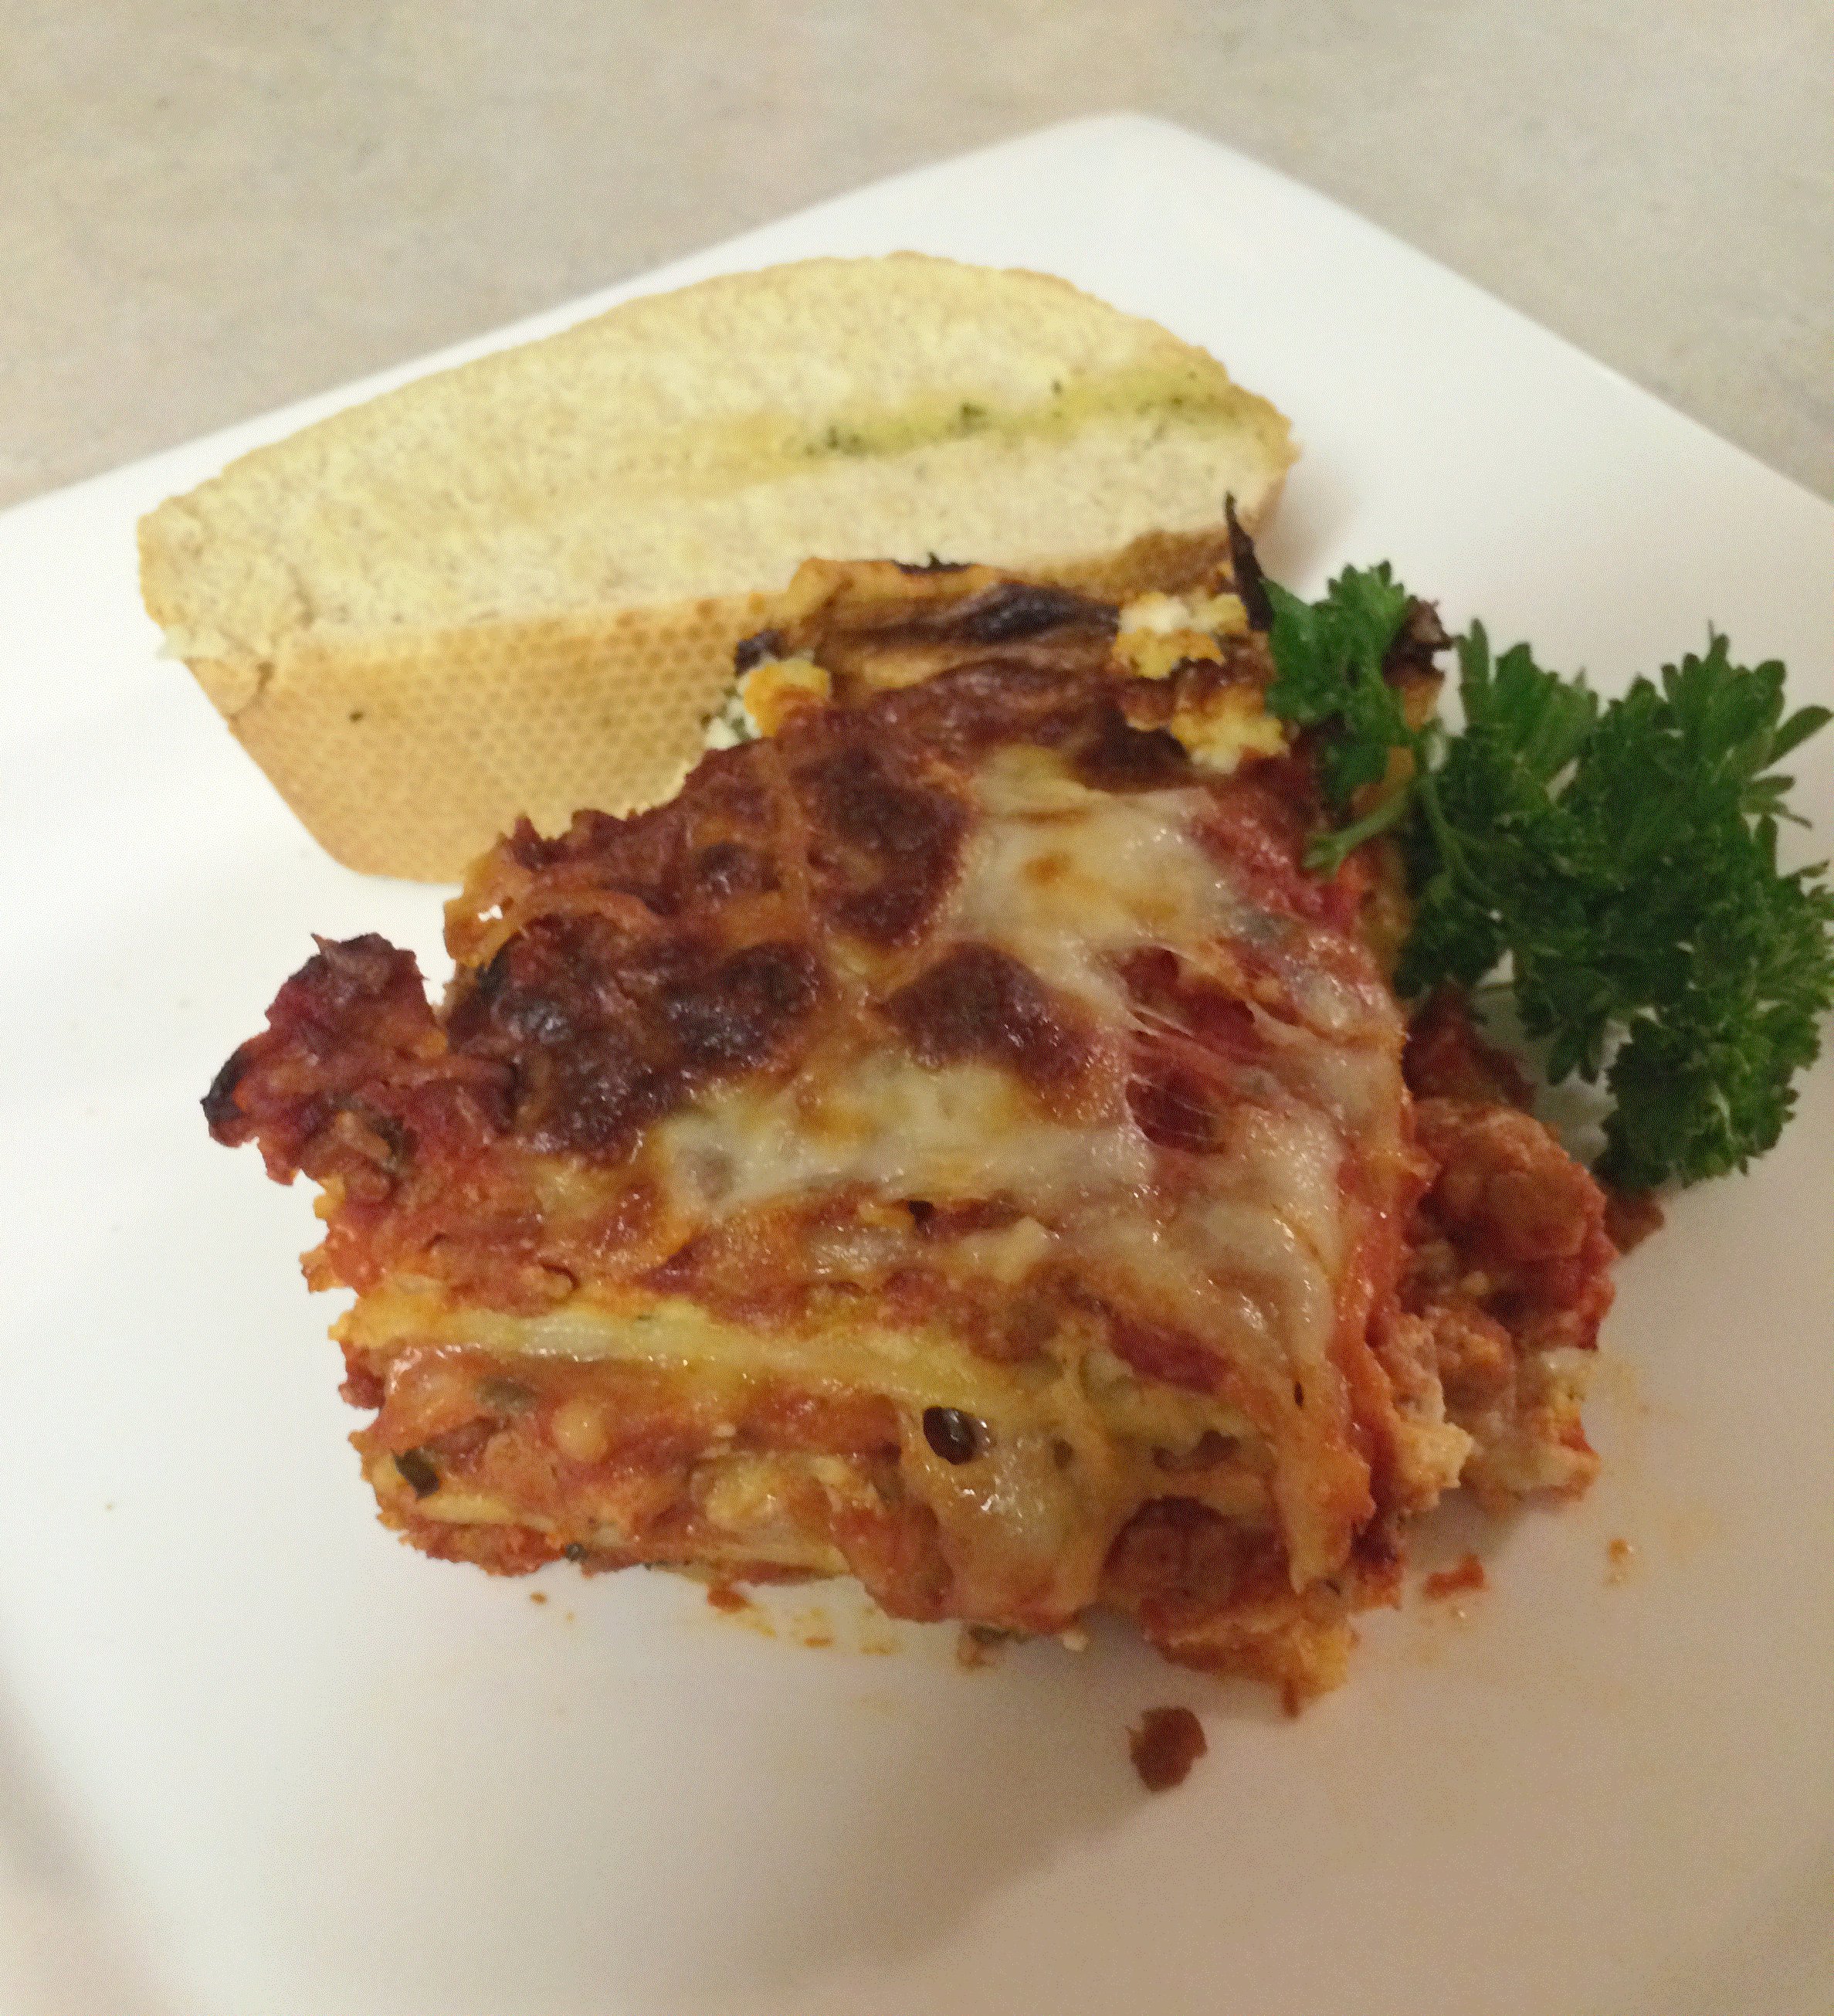 Four Cheese Lasagna with Spicy Italian Sausage